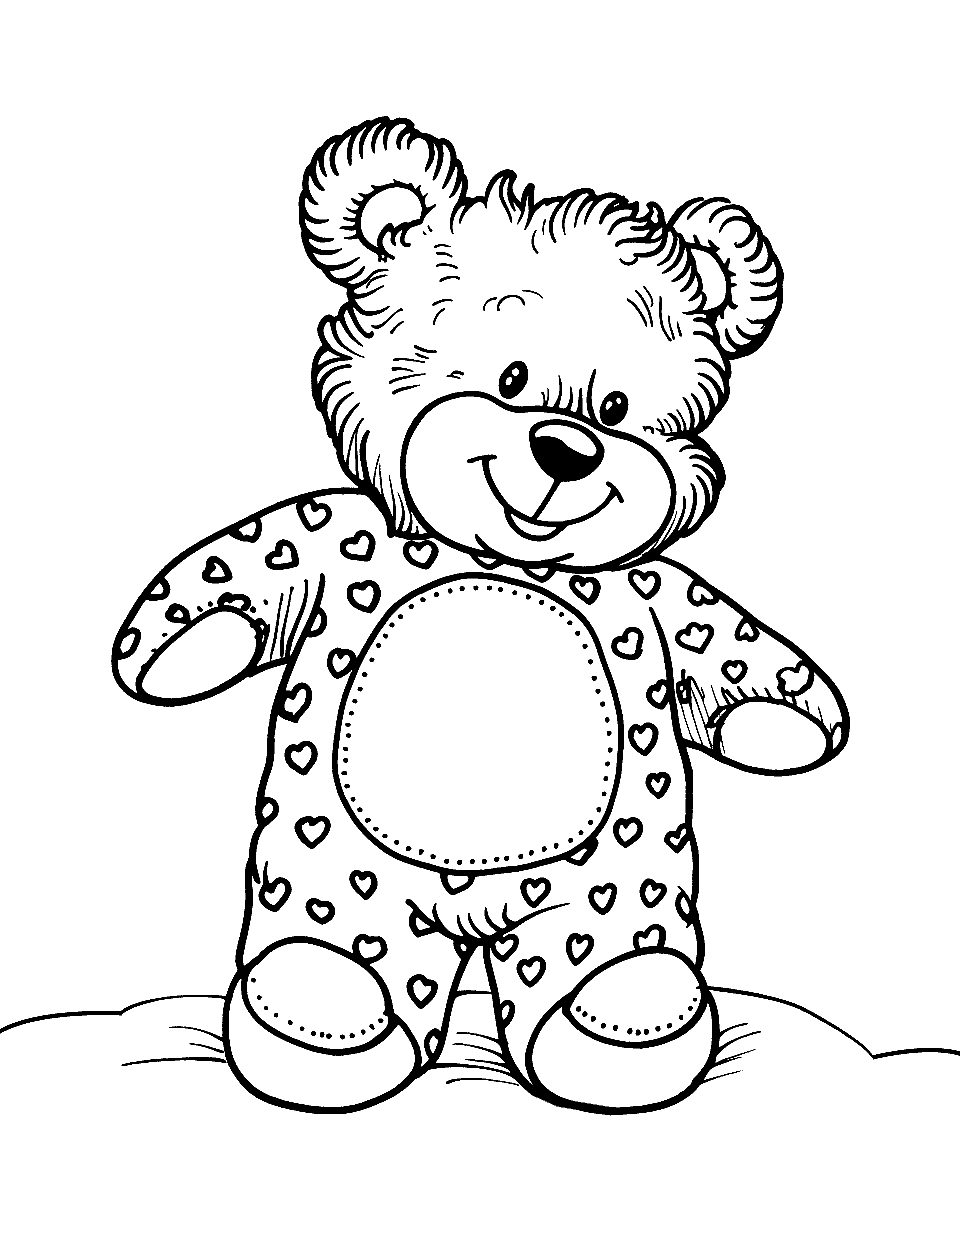 Teddy Bear in Pajamas Coloring Page - A teddy bear ready for bed in cute pajamas.